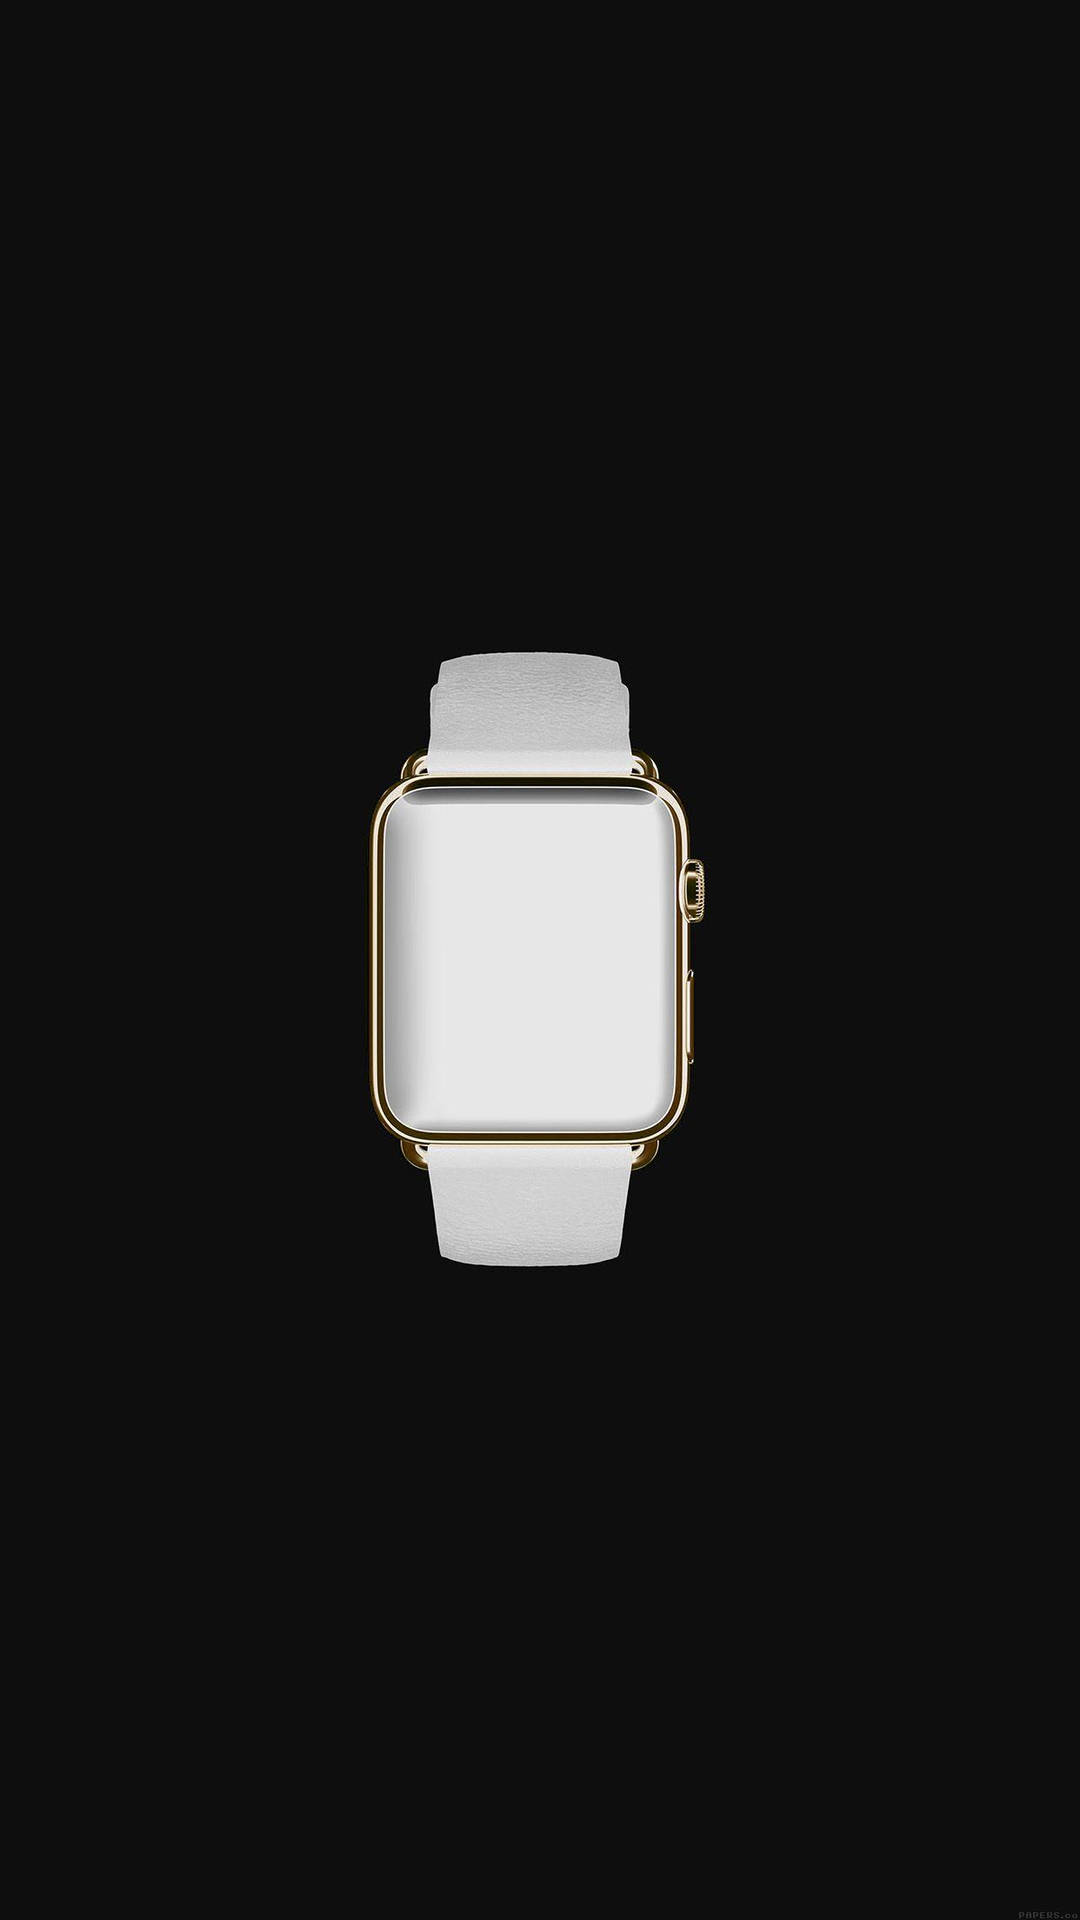 Apple Watch 1242X2208 Wallpaper and Background Image